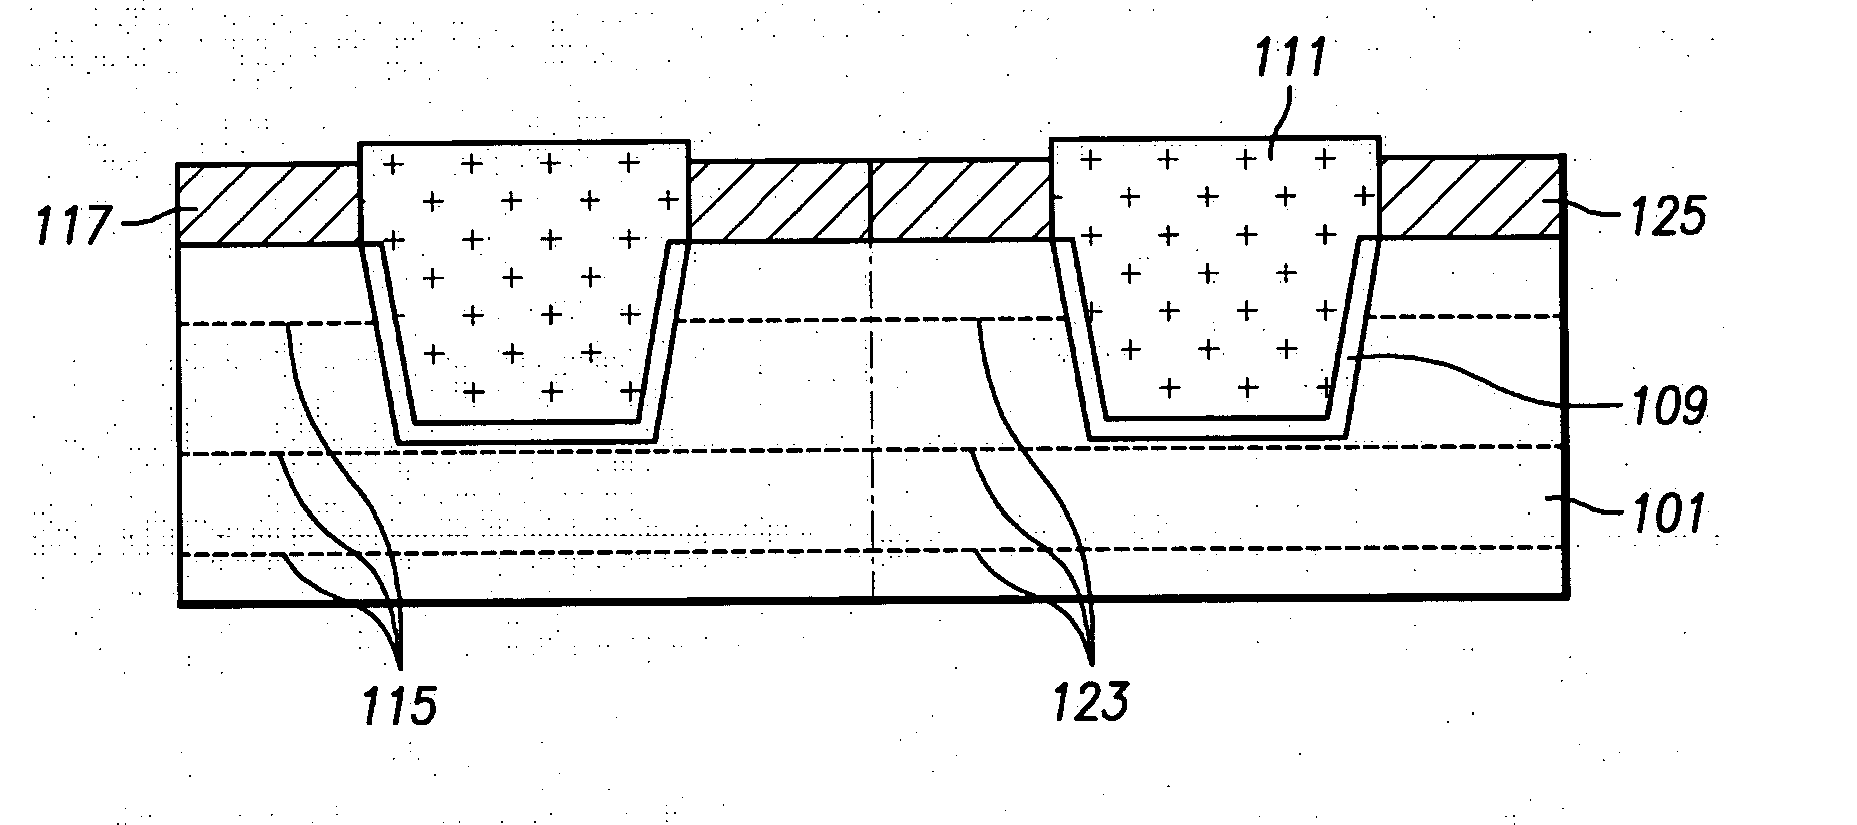 Semiconductor device using EPI-layer and method of forming the same